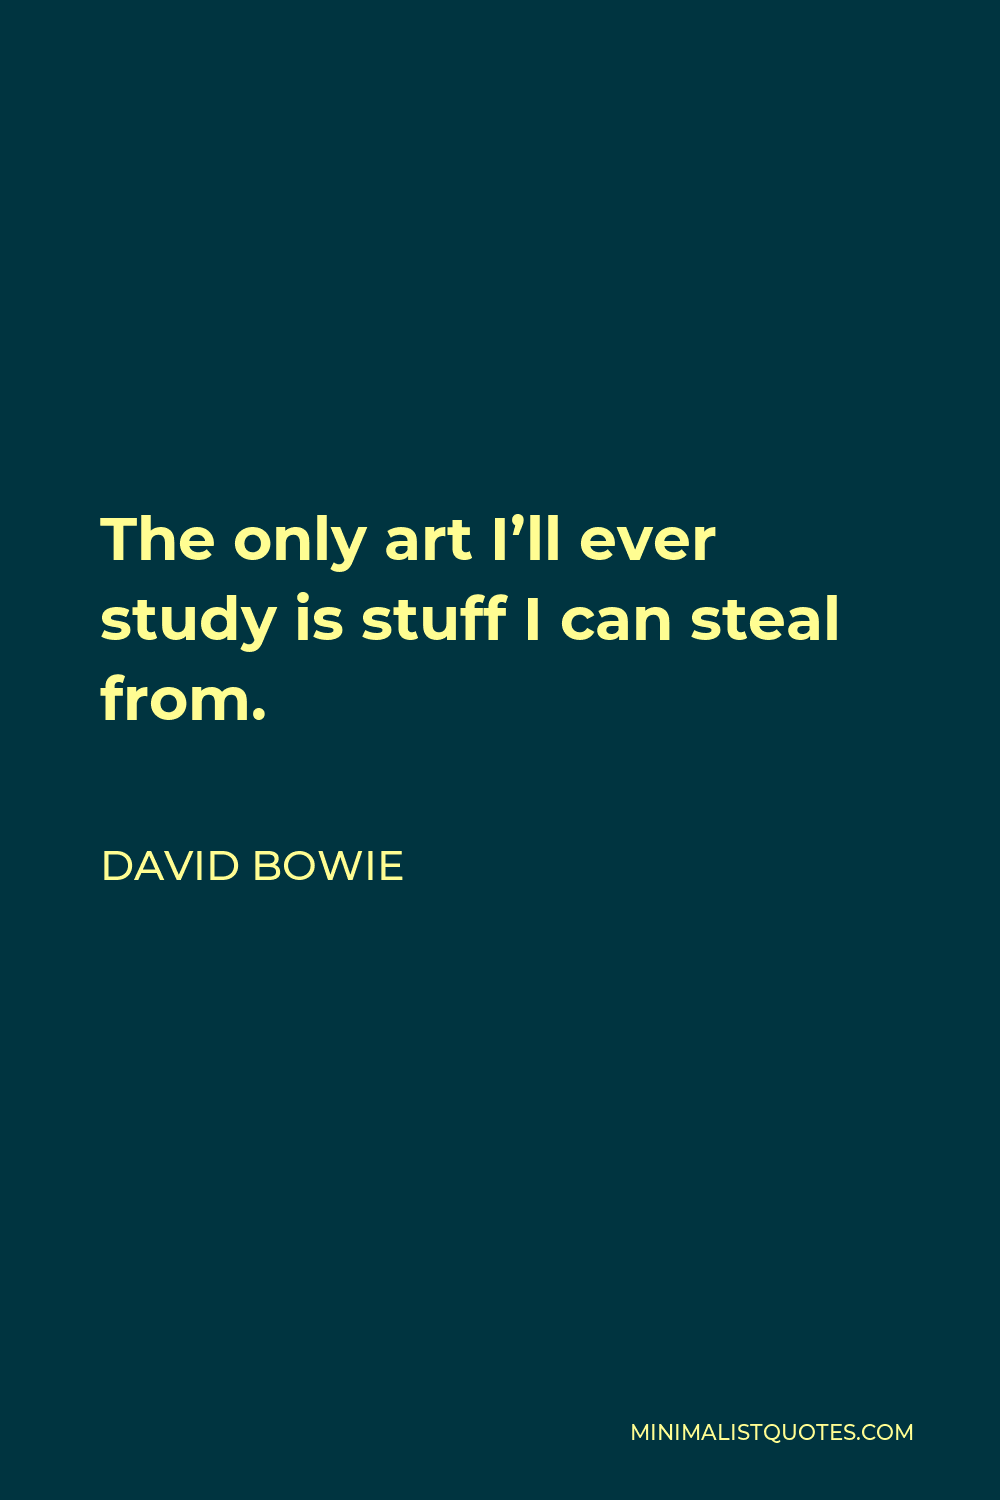 David Bowie Quote - The only art I’ll ever study is stuff I can steal from.